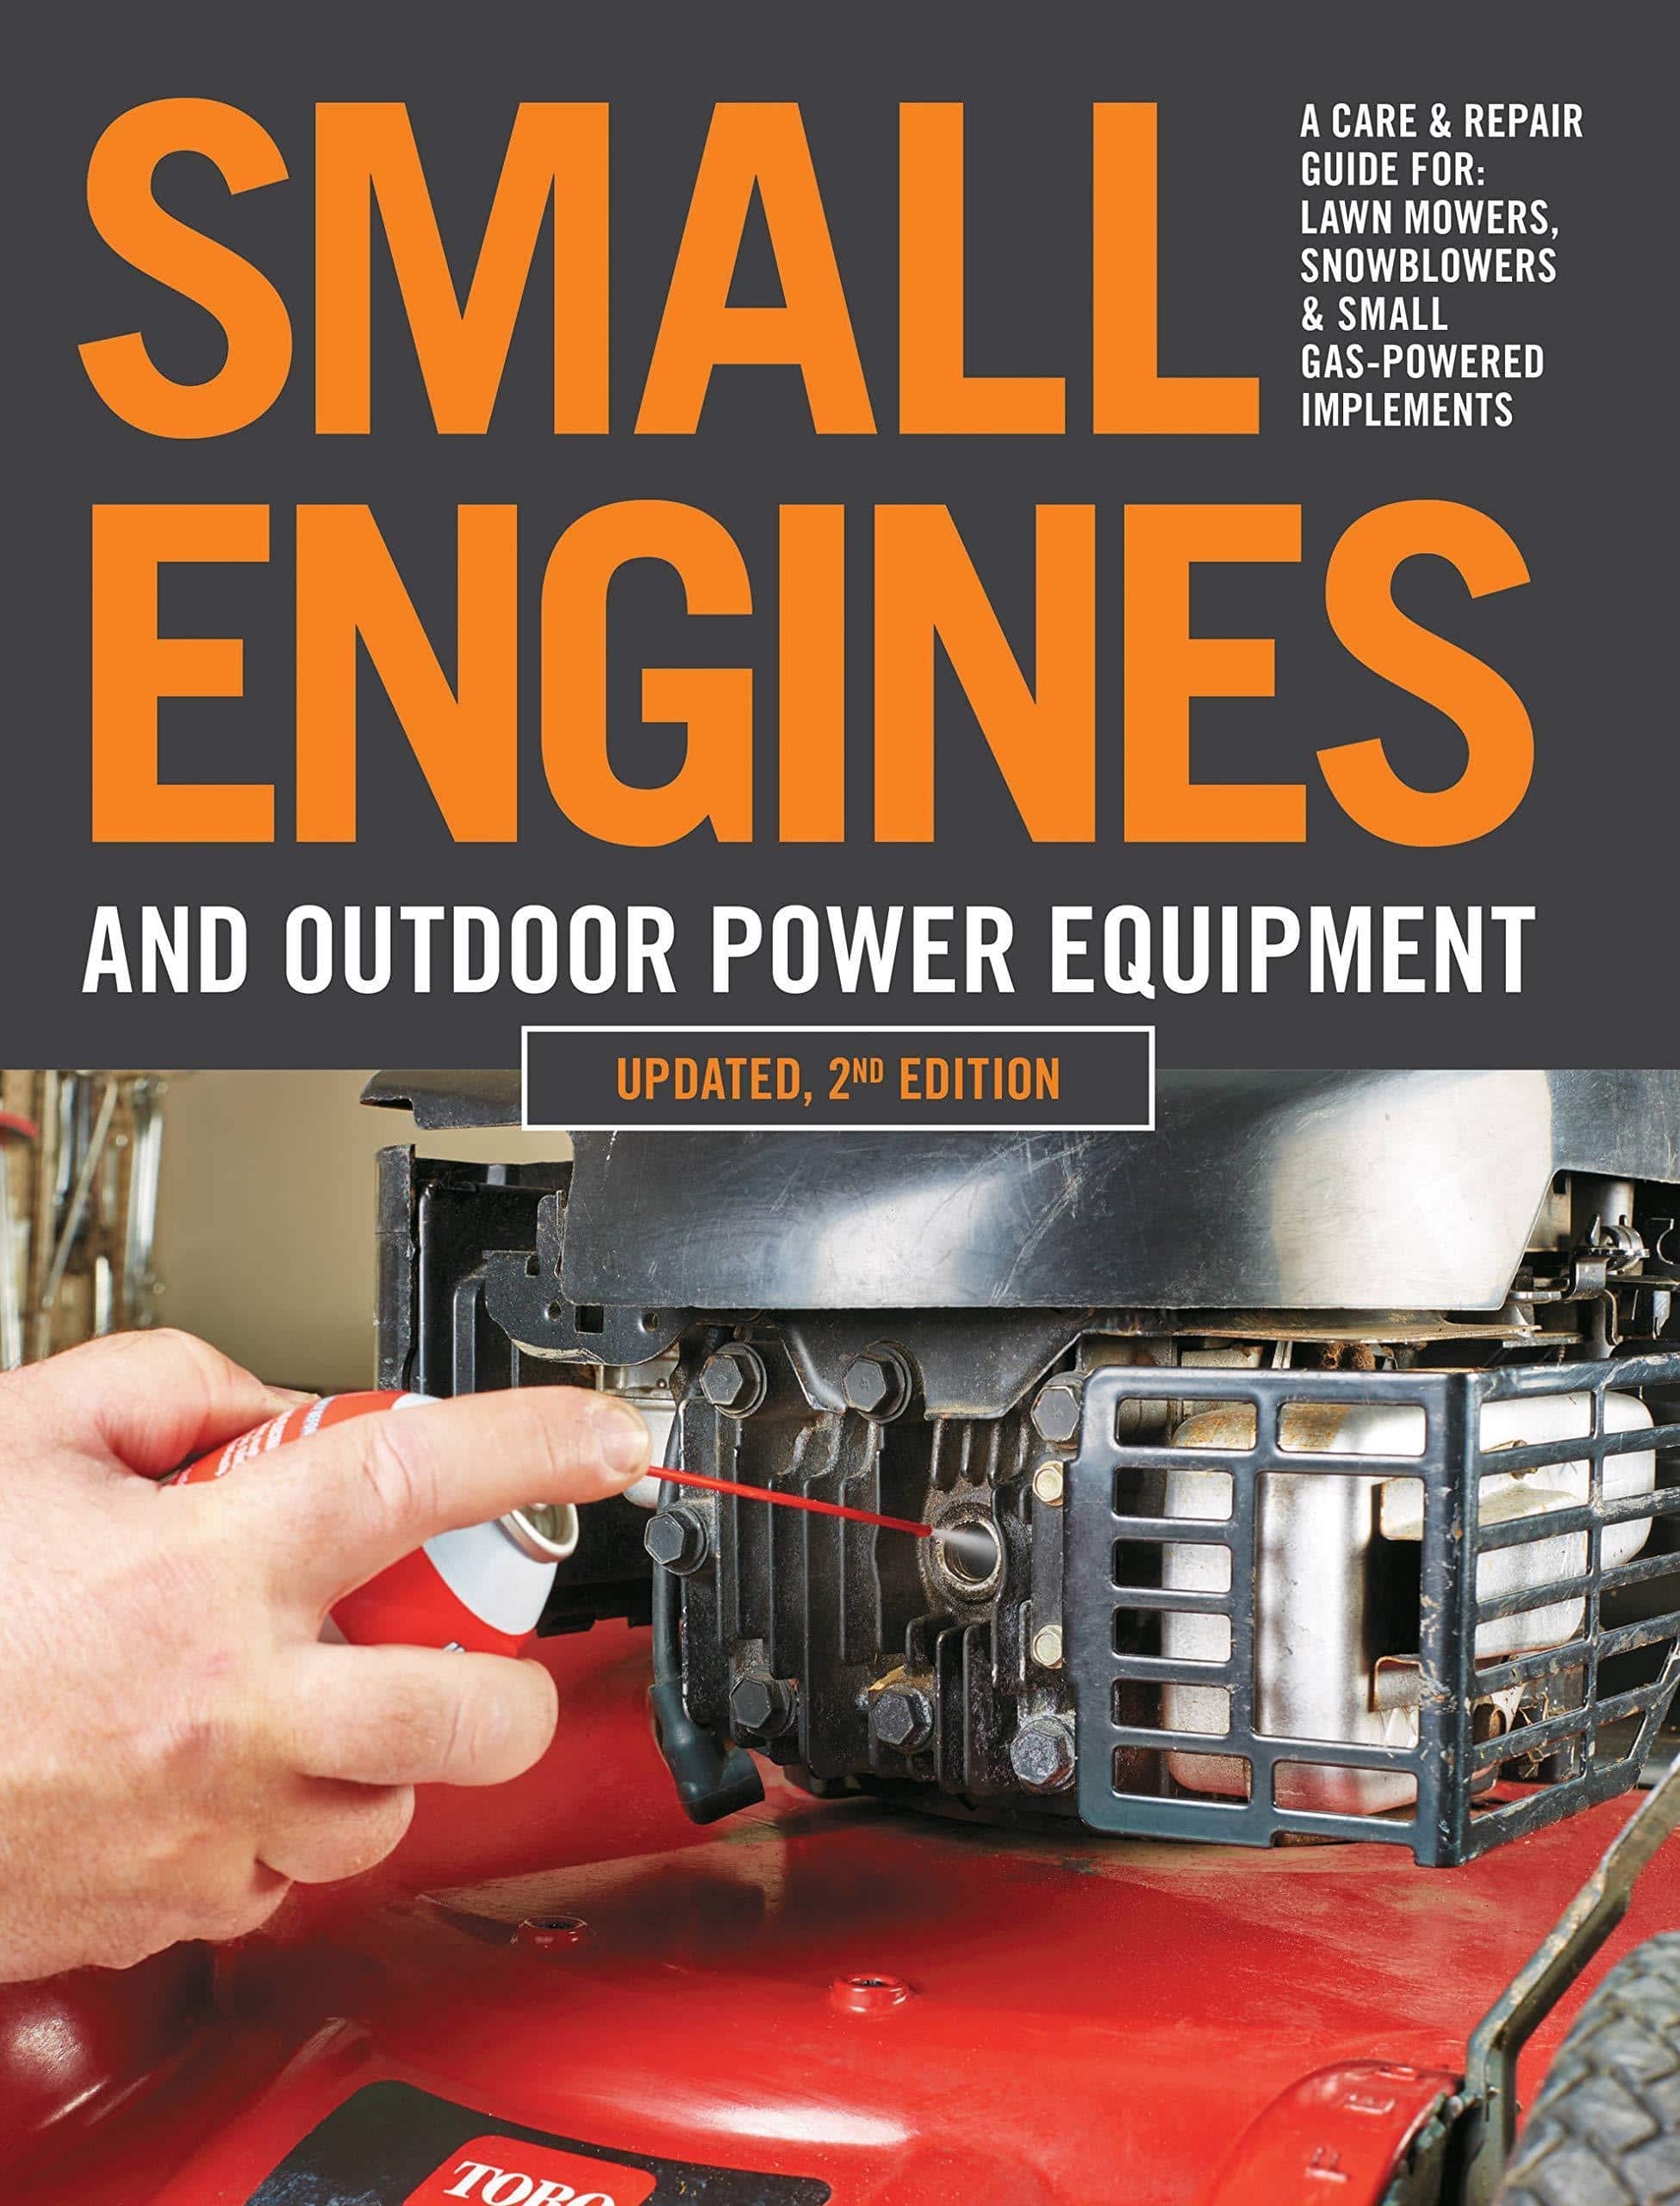 Small Engines and Outdoor Power Equipment, Updated 2nd Edition - SureShot Books Publishing LLC